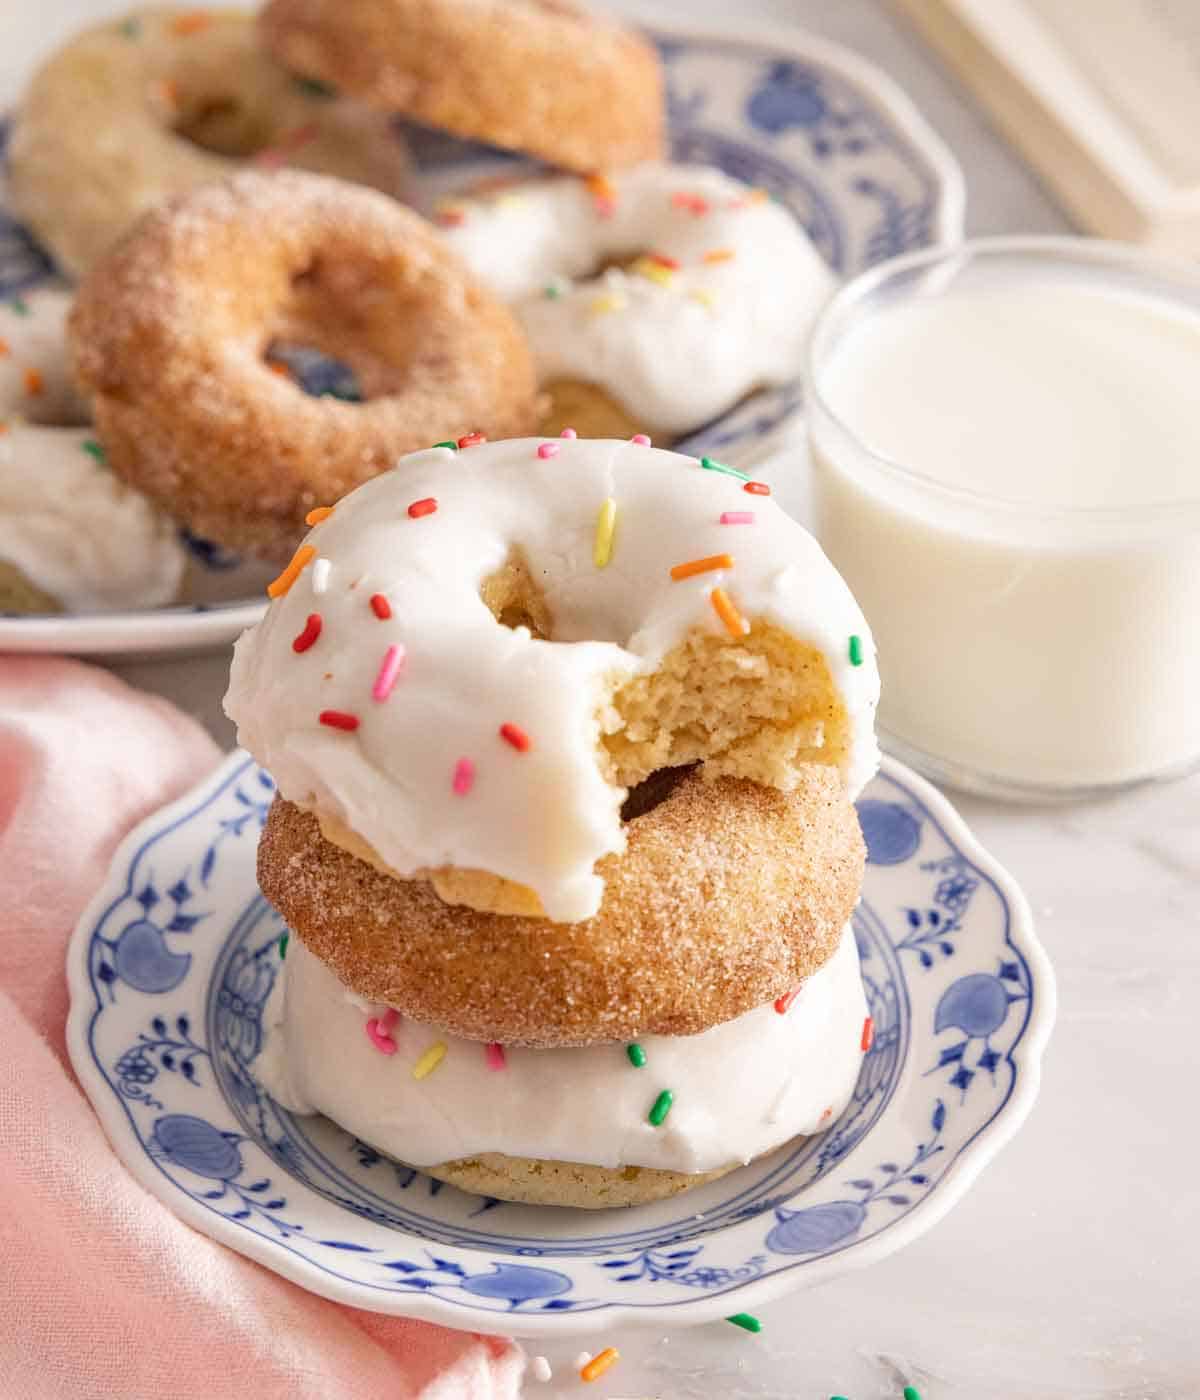 A stack of three baked donuts by a glass of milk.